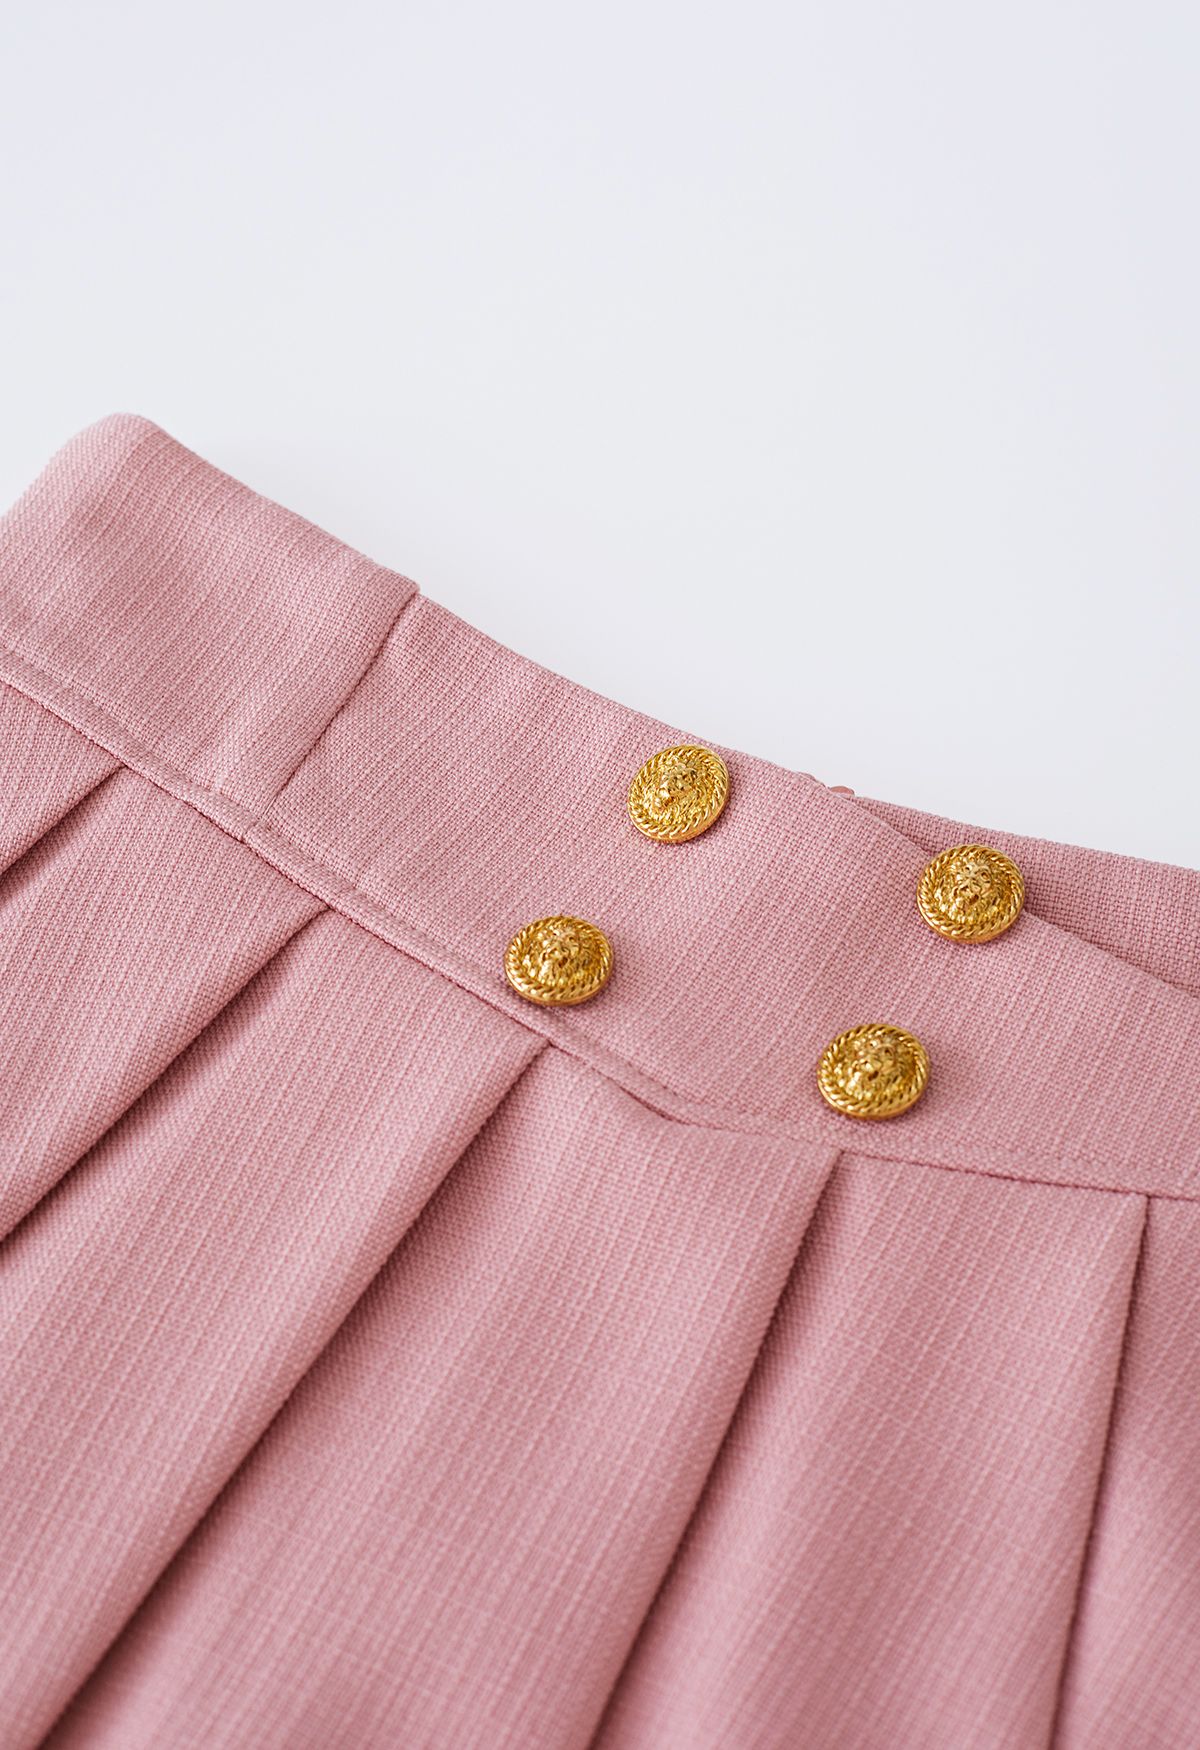 Golden Button Pleated Flare Mini Skirt in Pink